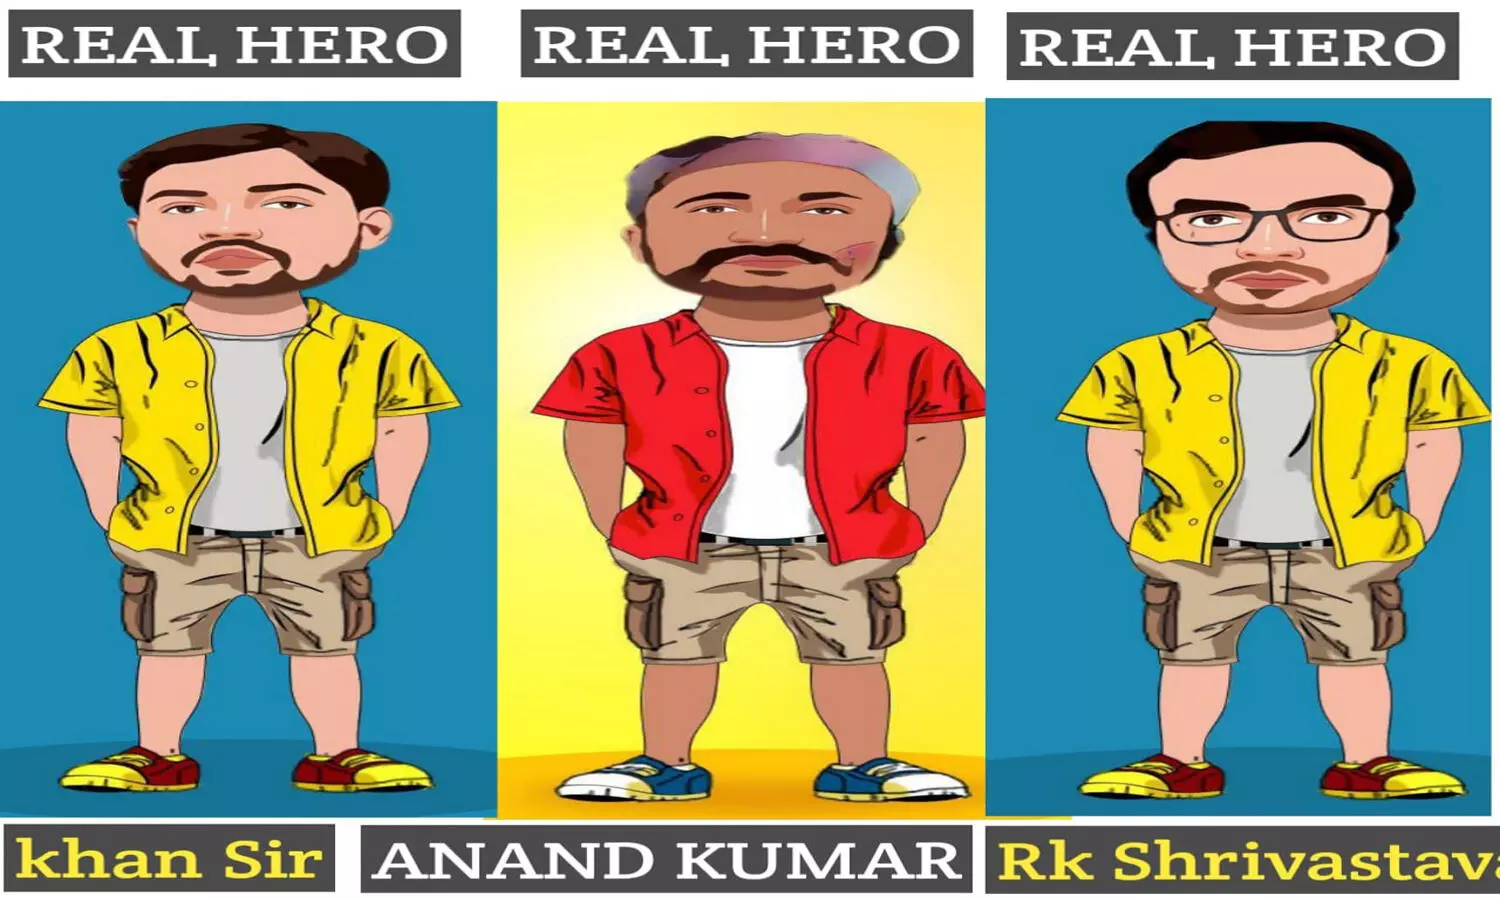 Meet the three Real Super Heroes of the country; know details about them